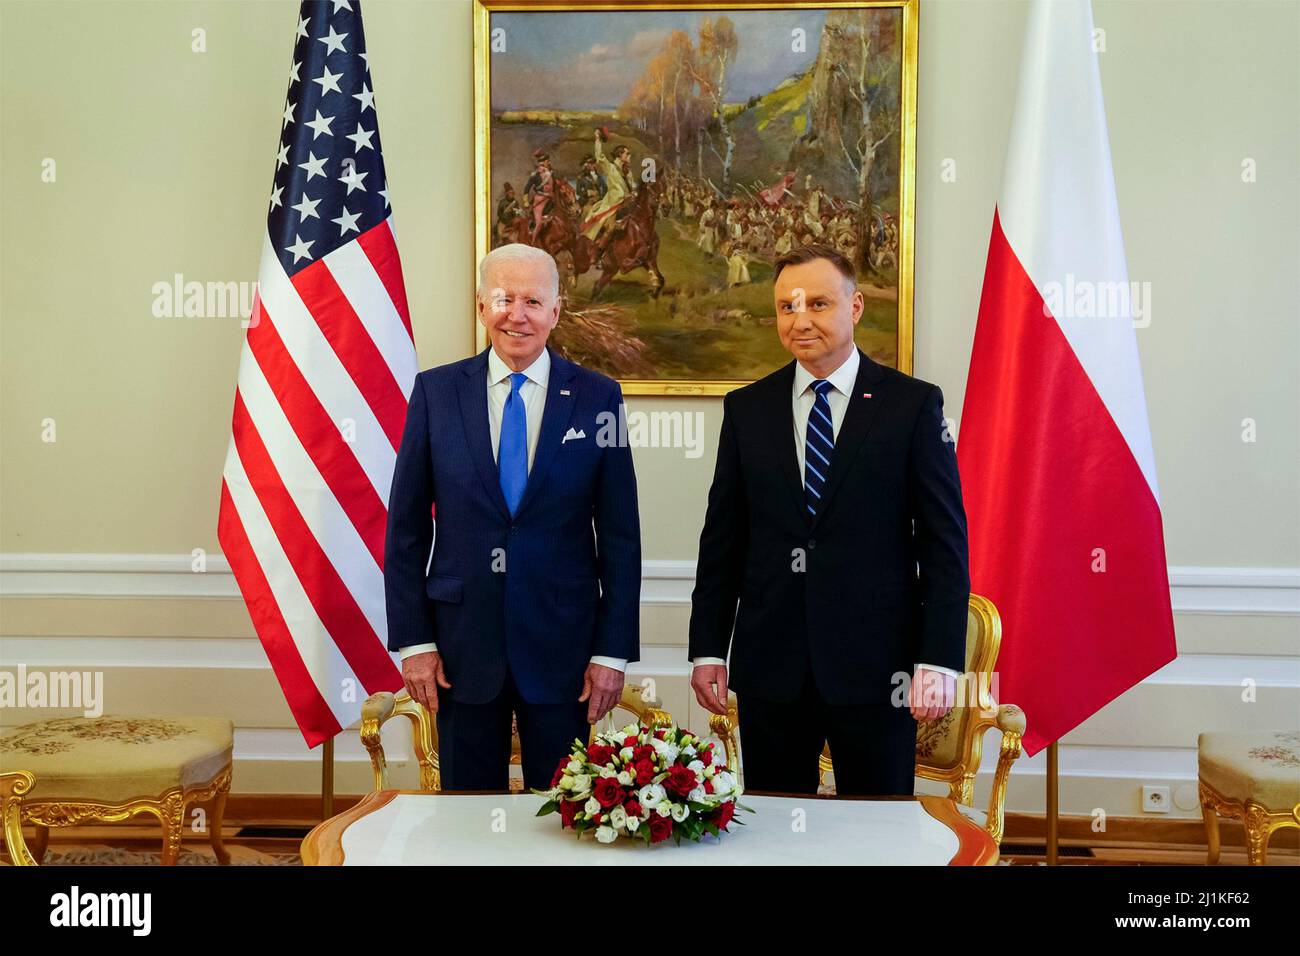 Warsaw, Poland. 26th Mar, 2022. U.S President Joe Biden stands with Polish President Andrzej Duda, right, before the start of bilateral meetings to discuss the situation in Ukraine at the Presidential Palace, March 26, 2022 in Warsaw, Poland. Credit: Adam Schultz/White House Photo/Alamy Live News Stock Photo